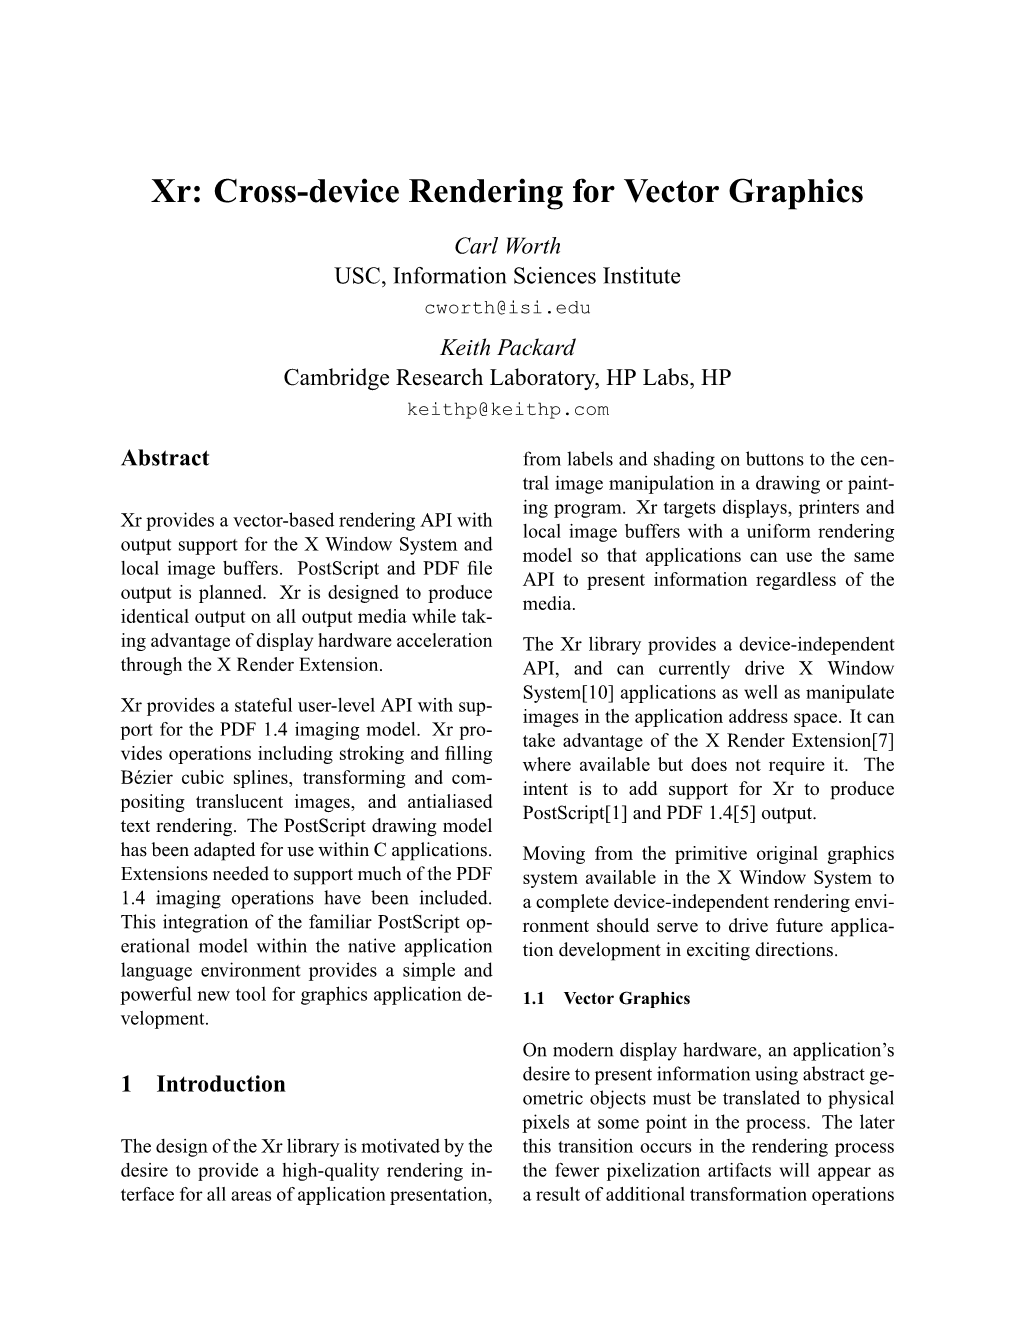 Xr: Cross-Device Rendering for Vector Graphics